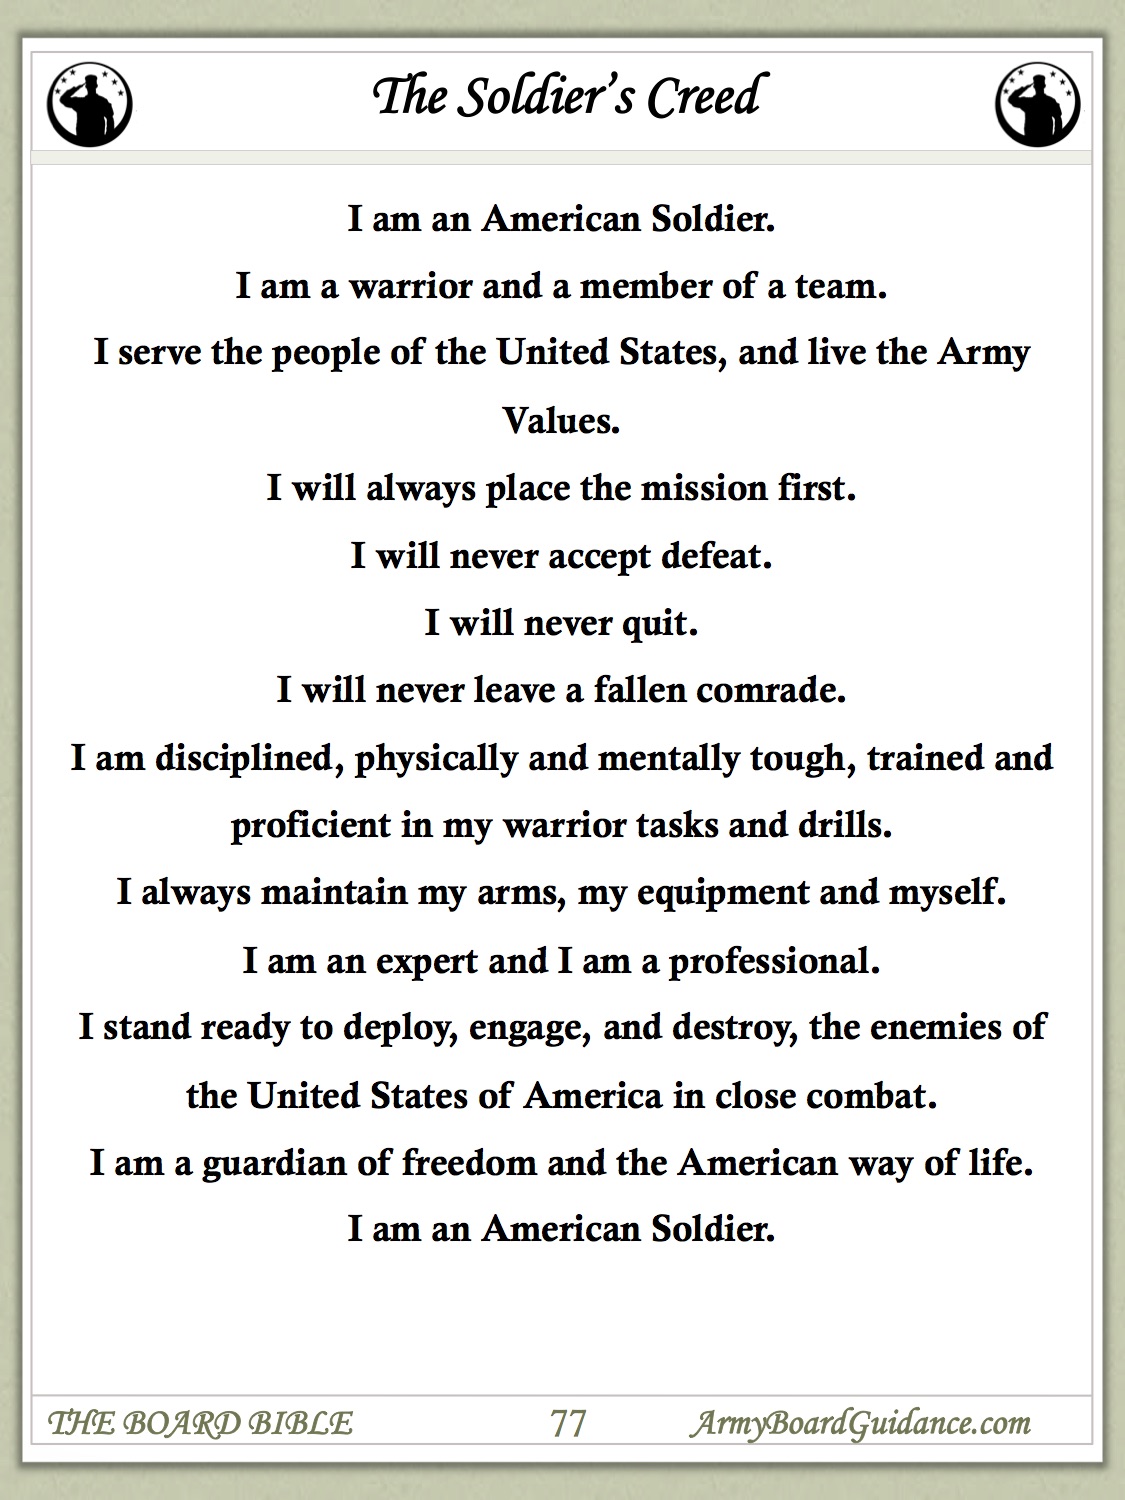 The Soldier's Creed - Army Board Guidance